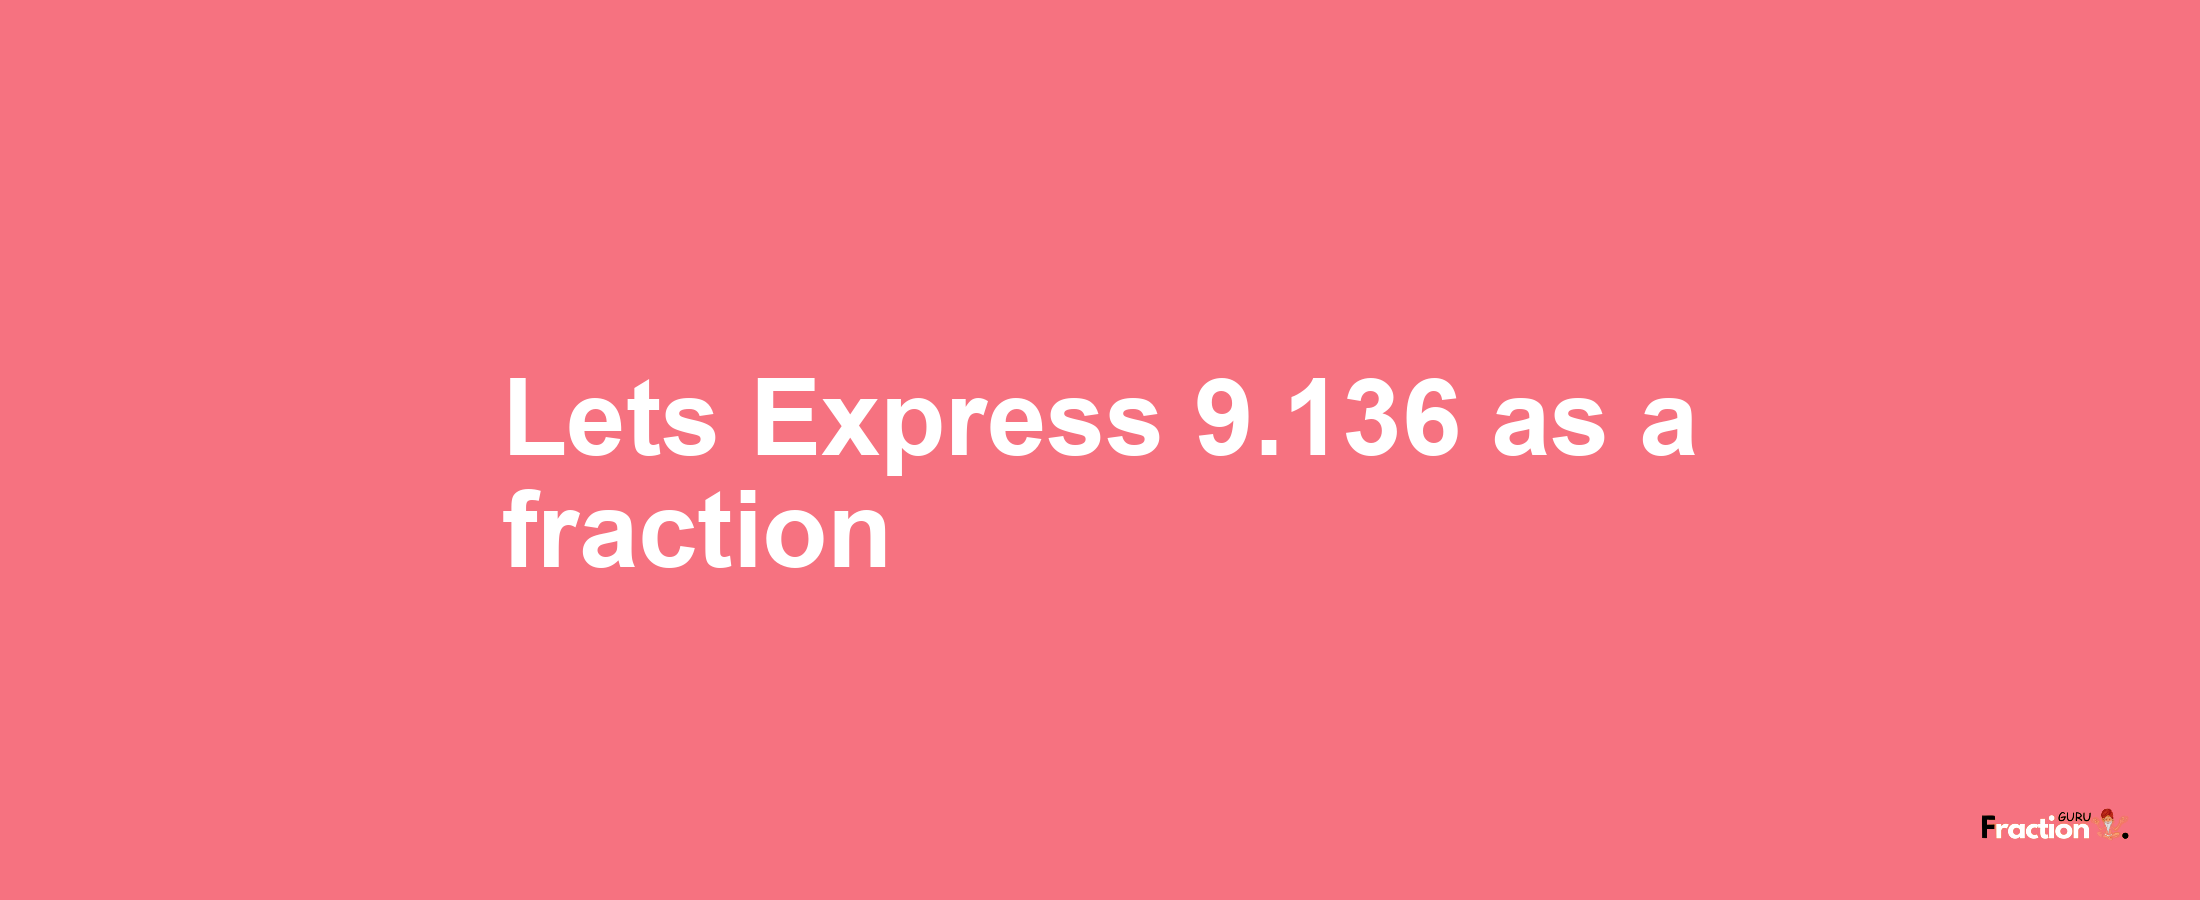 Lets Express 9.136 as afraction